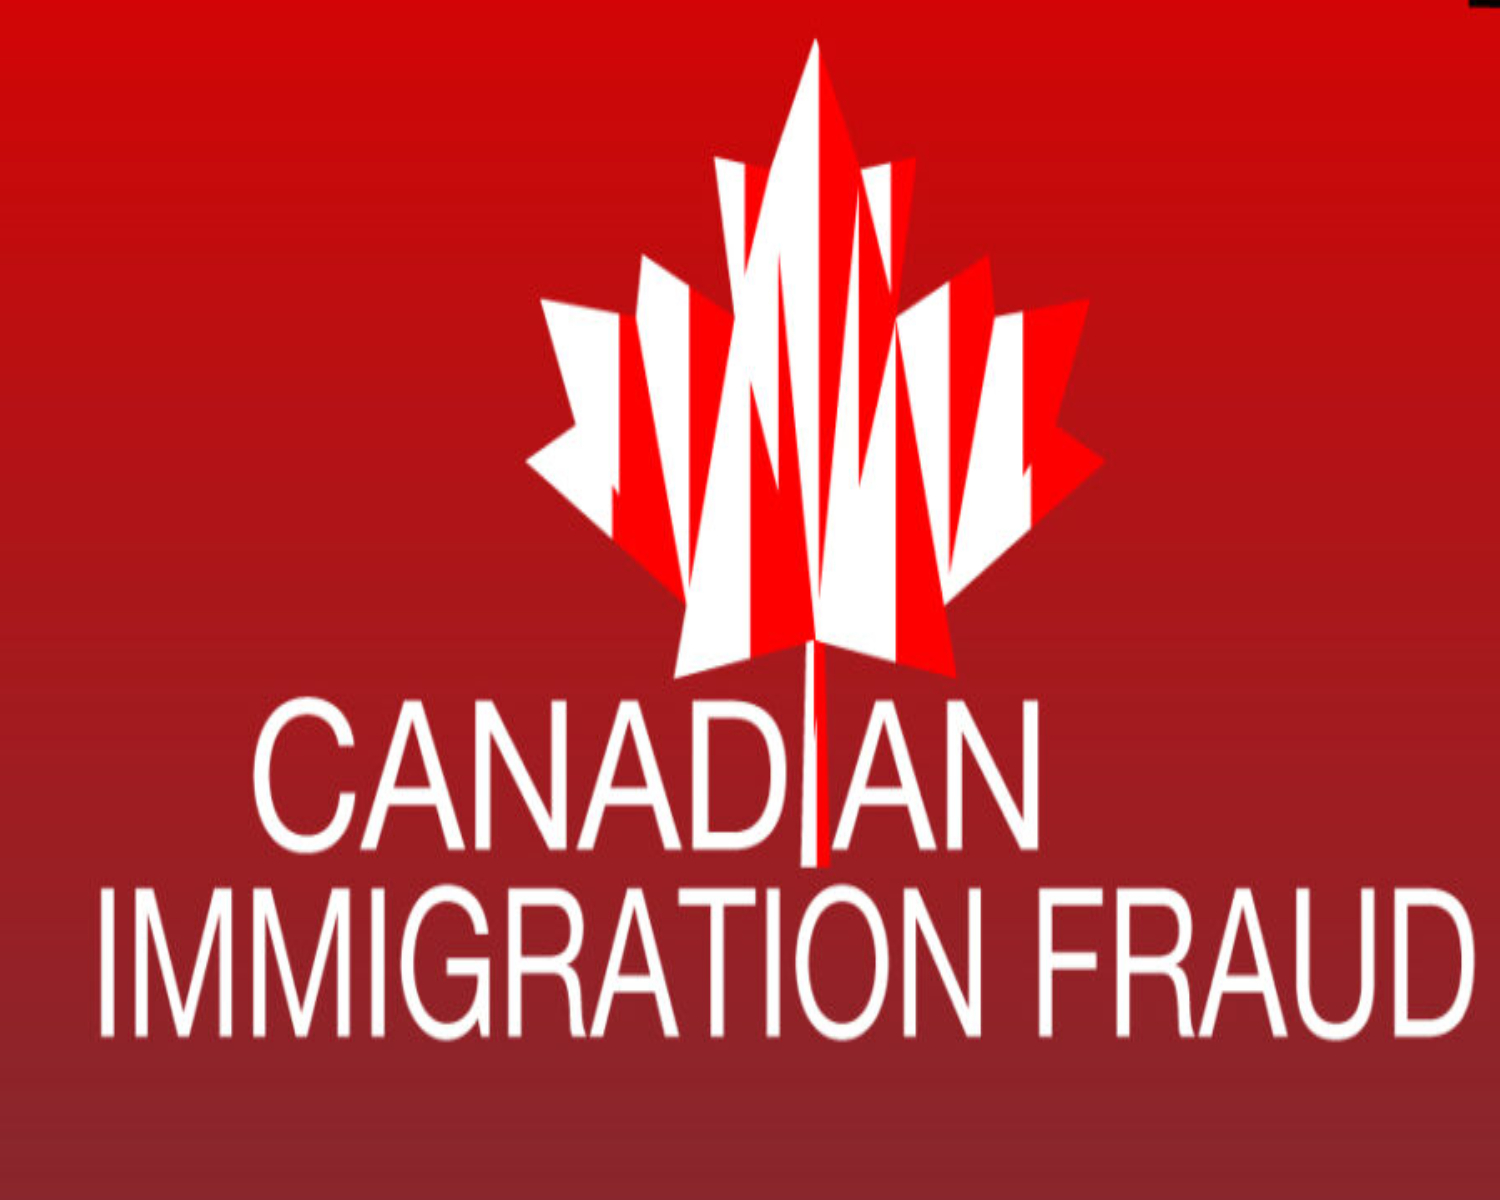 Canada Immigration Frauds